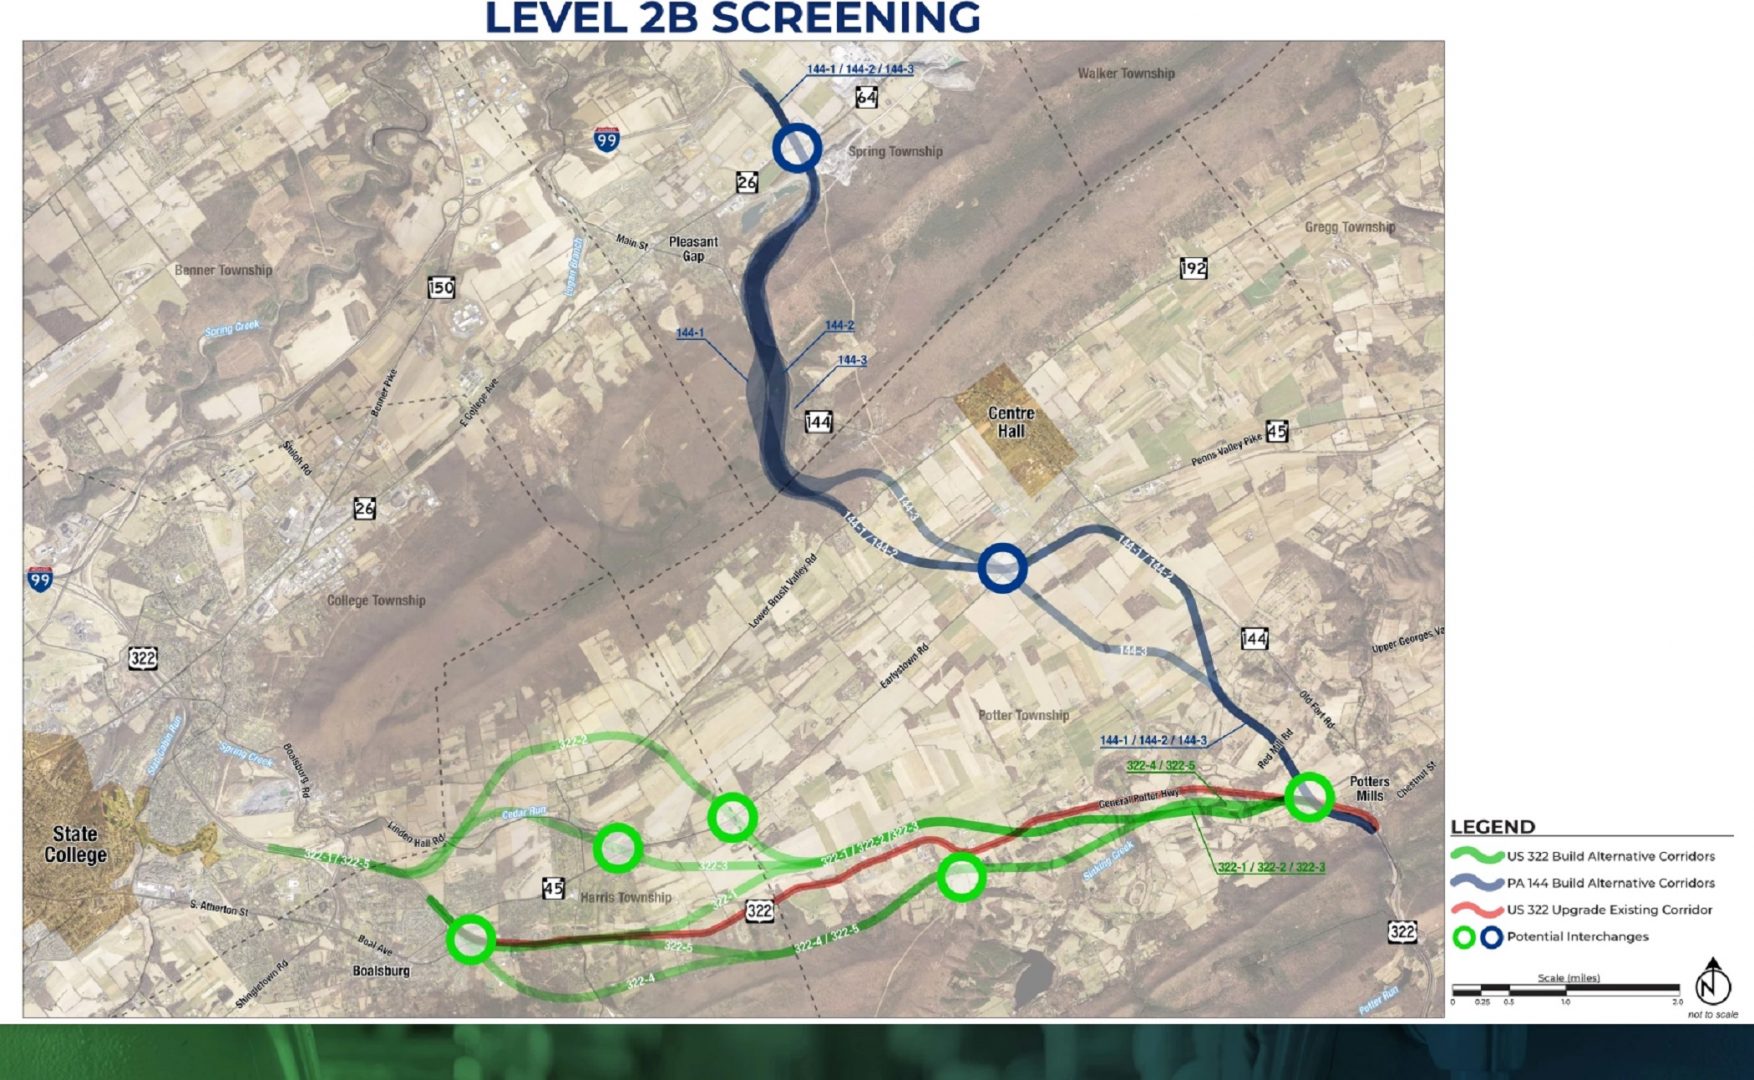 PennDOT is in the process of gathering data and public input on options for upgrading or replacing the stretch of U.S. Route 322 between Potters Mills and Boalsburg.